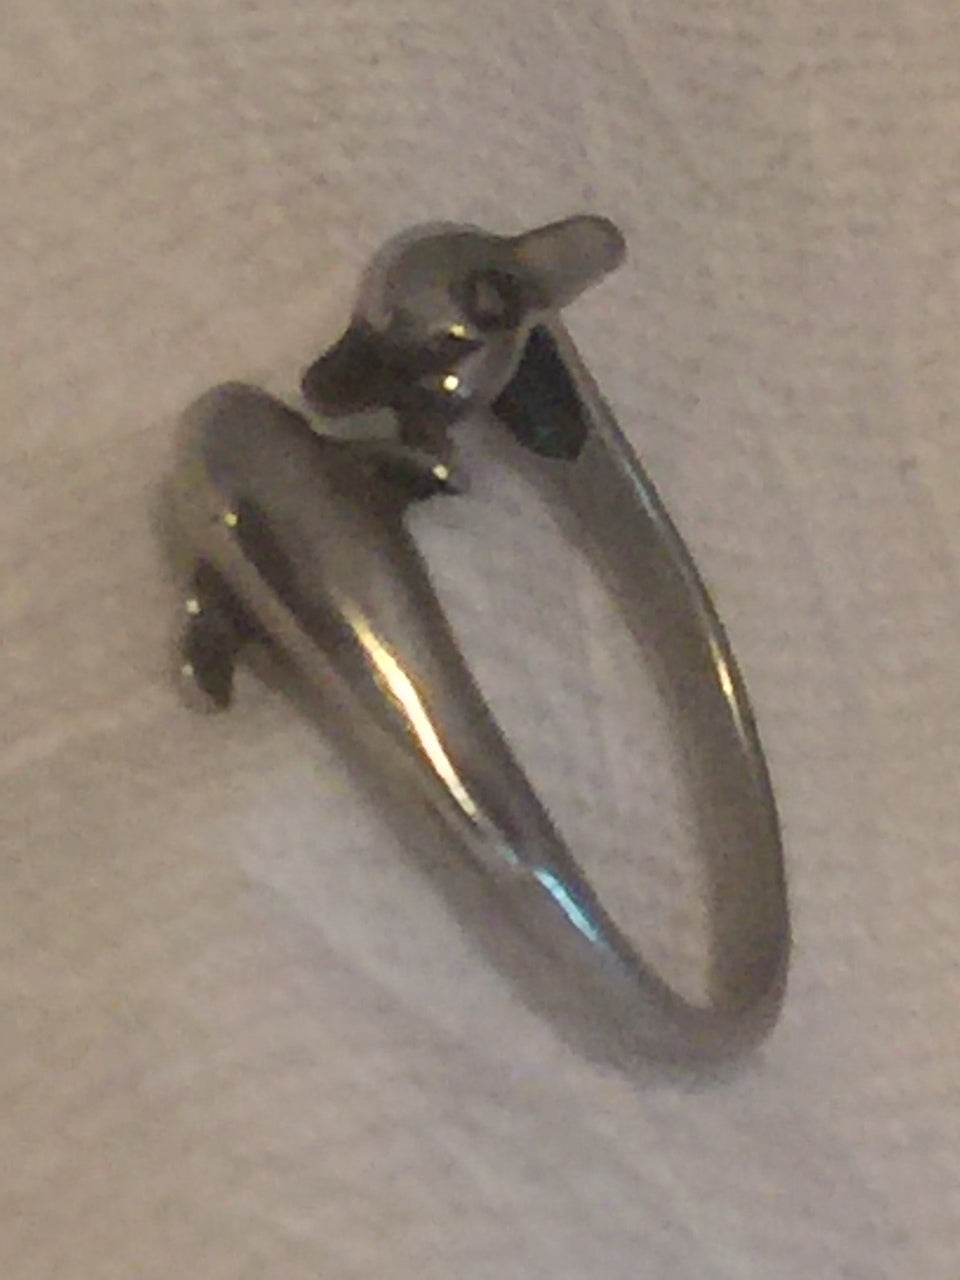 Vintage Sterling Silver Dolphin Ring Size 8.75  3.8g